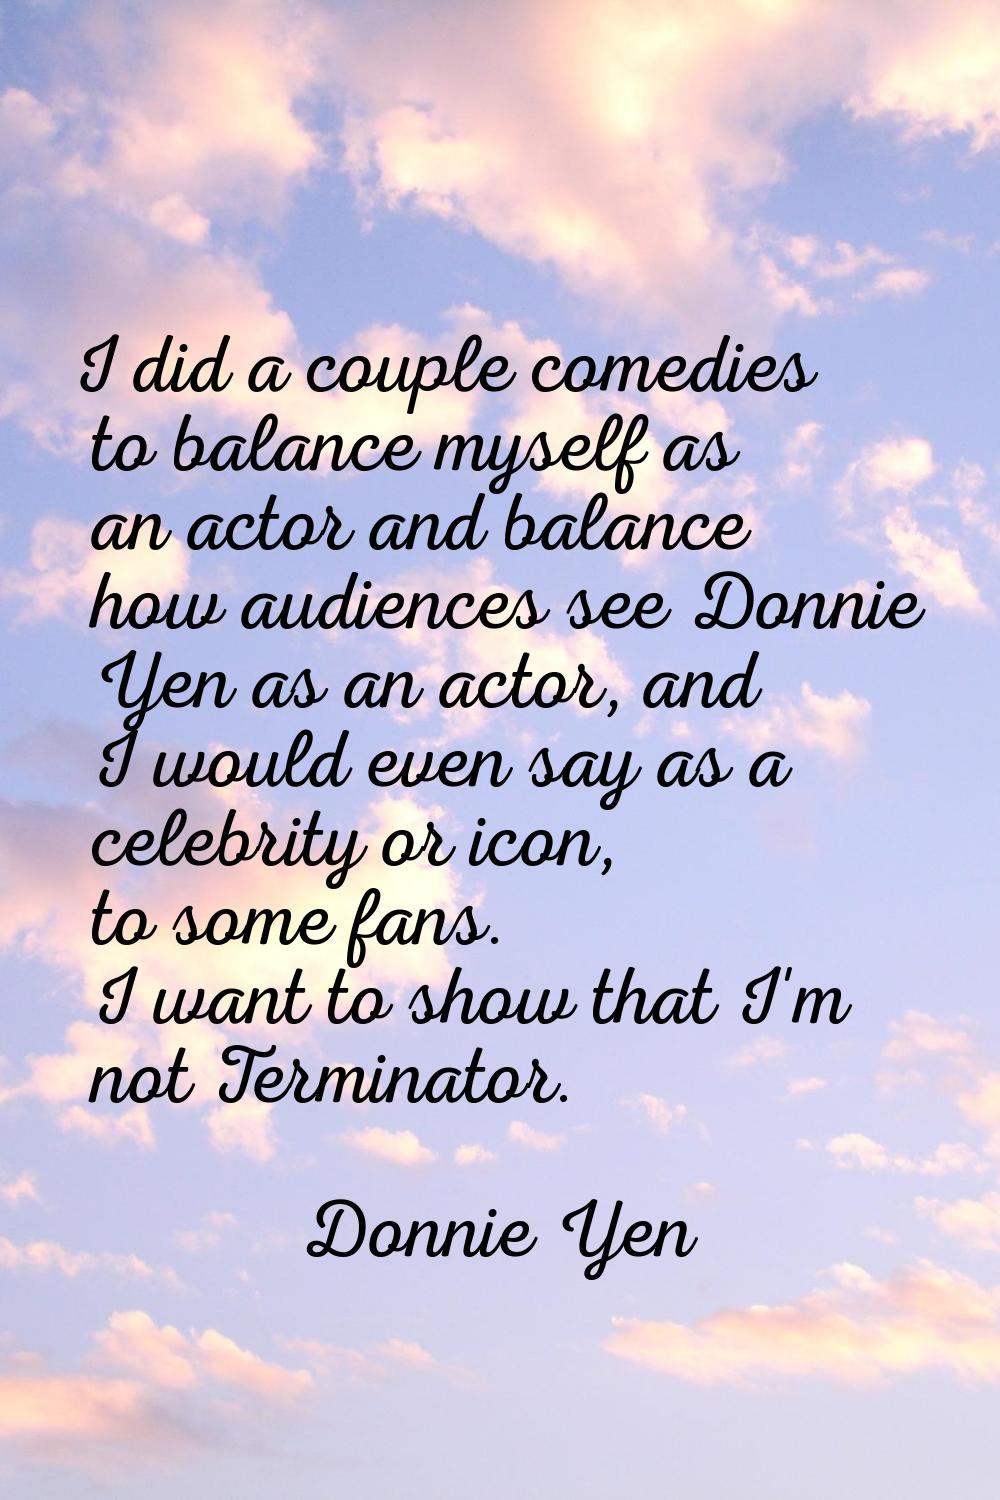 I did a couple comedies to balance myself as an actor and balance how audiences see Donnie Yen as a